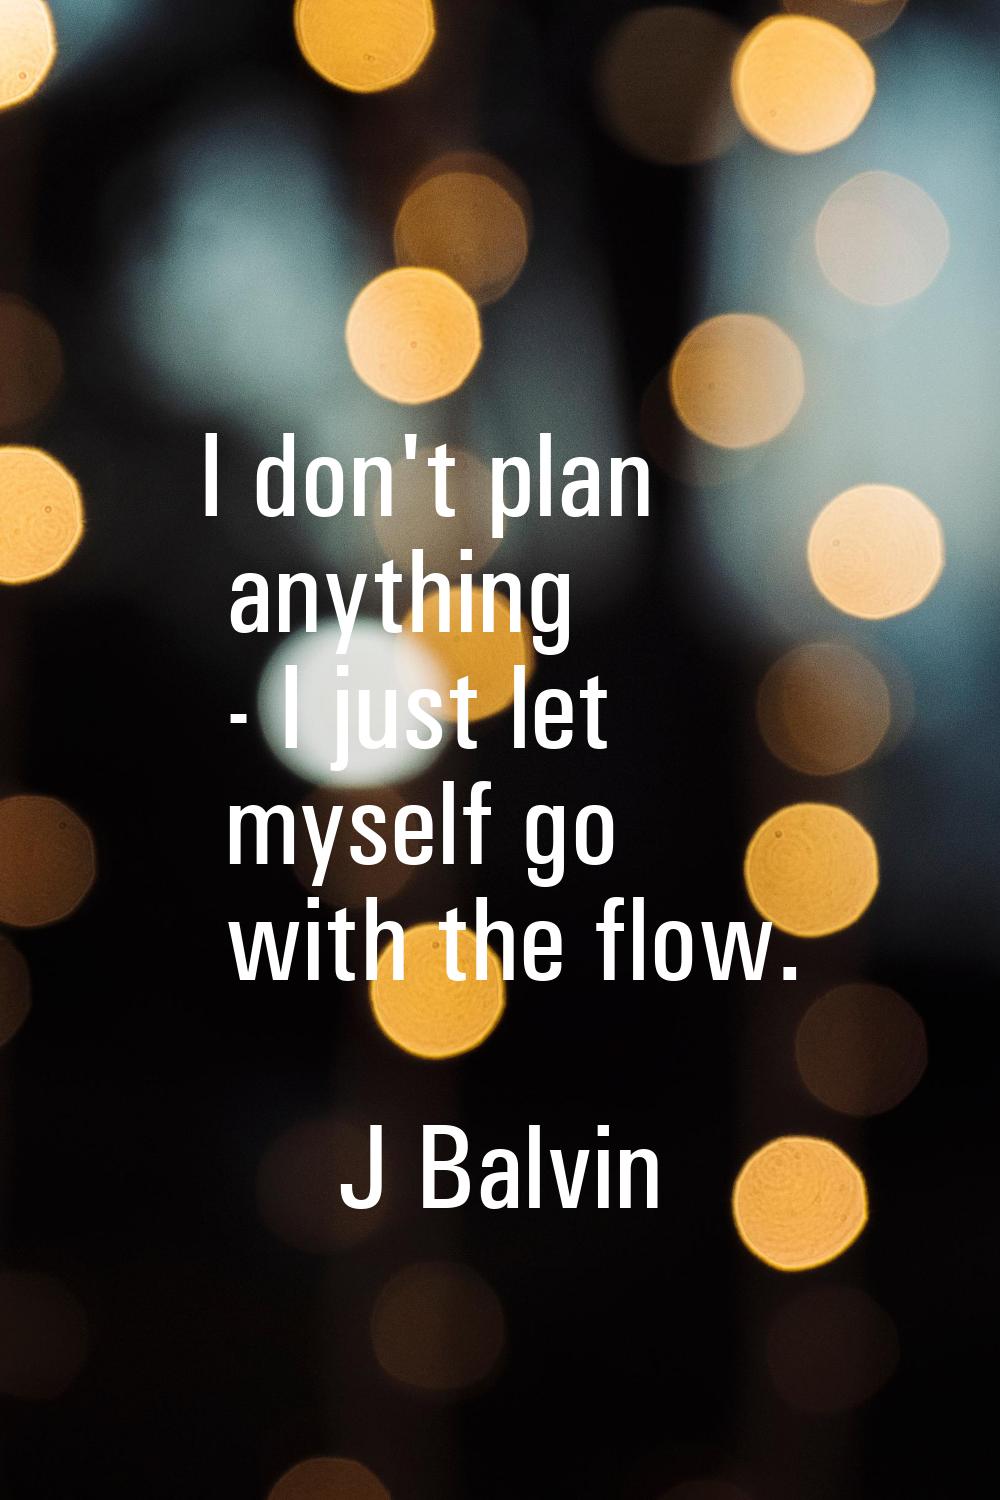 I don't plan anything - I just let myself go with the flow.